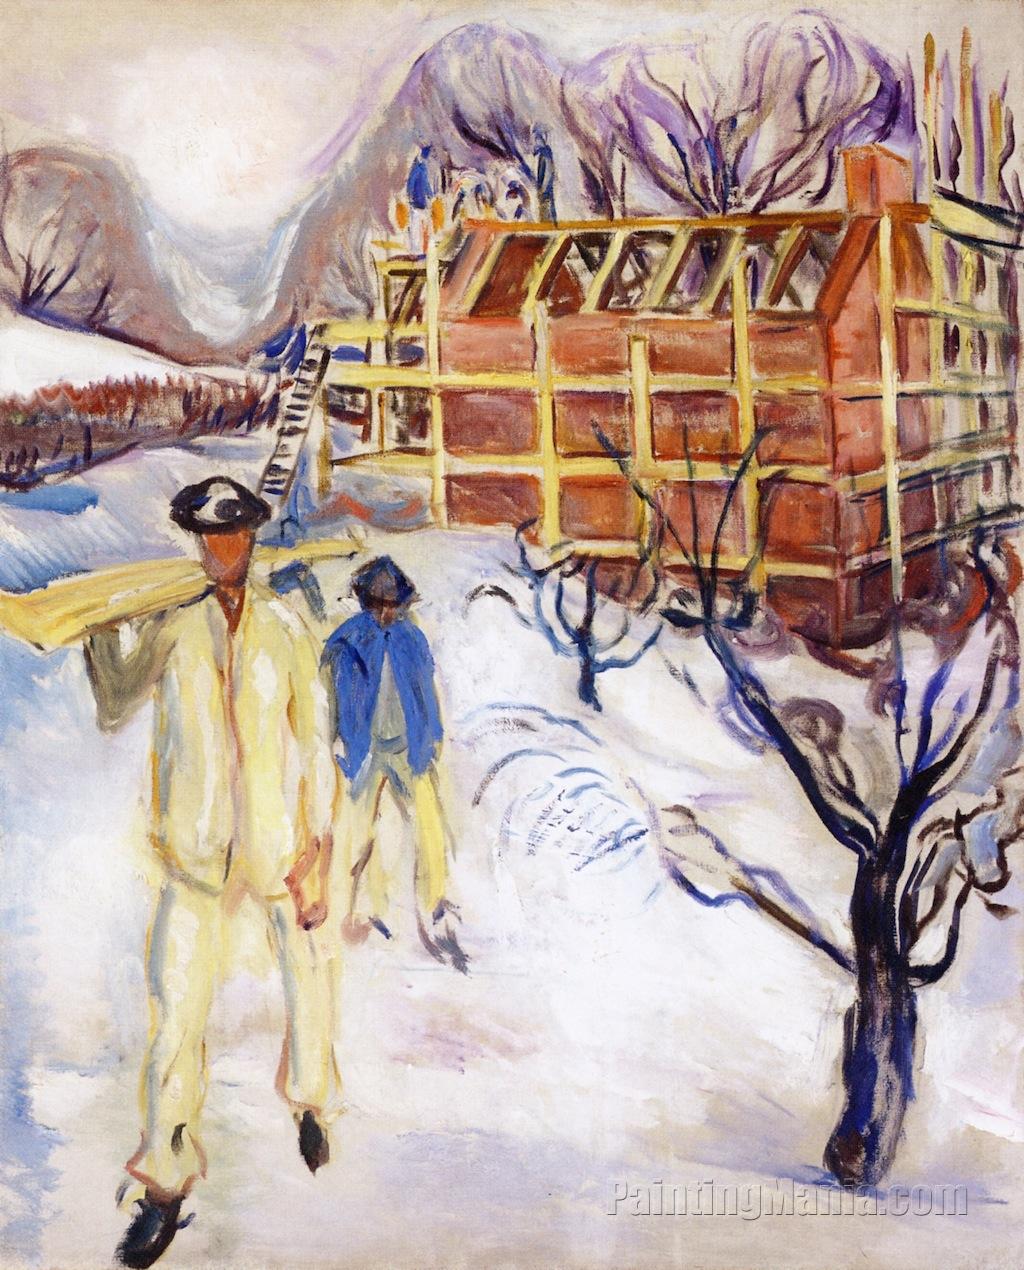 Building Workers in the Snow